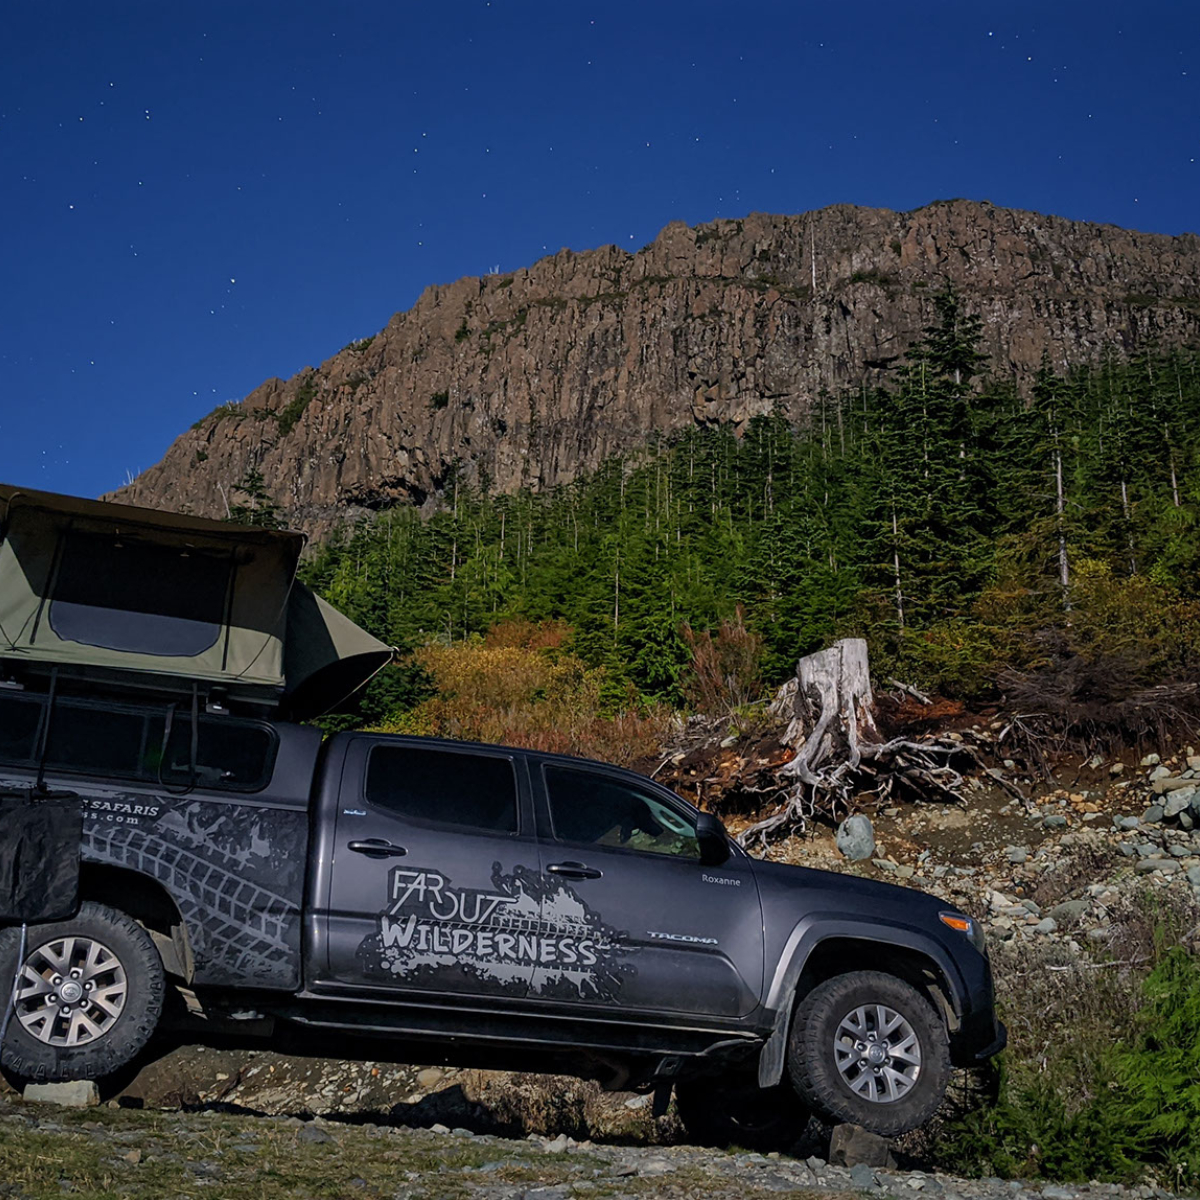 WINTER OPTIONS Overland Vehicle, Rooftop Tent & Camping Gear